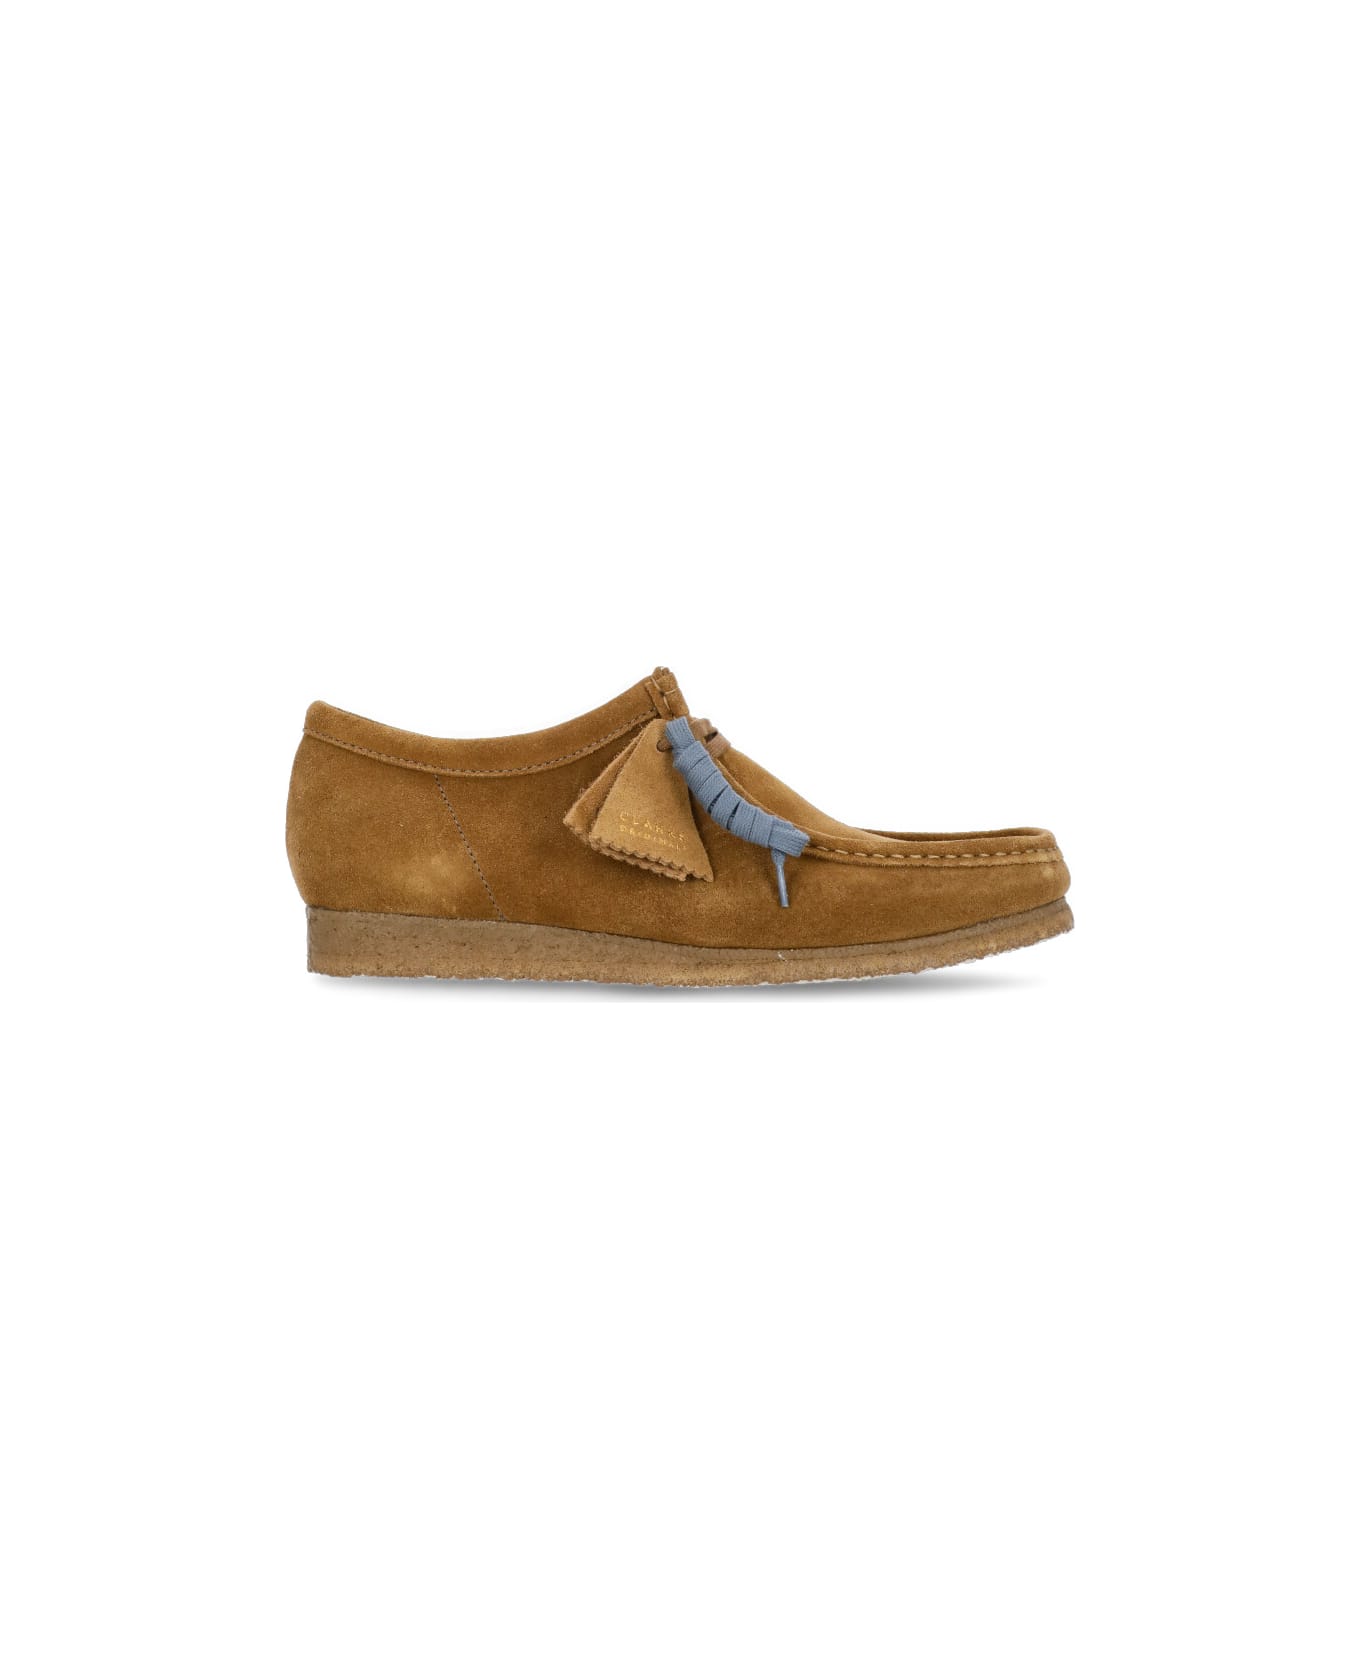 Clarks Wallabee Loafers Clarks - BROWN